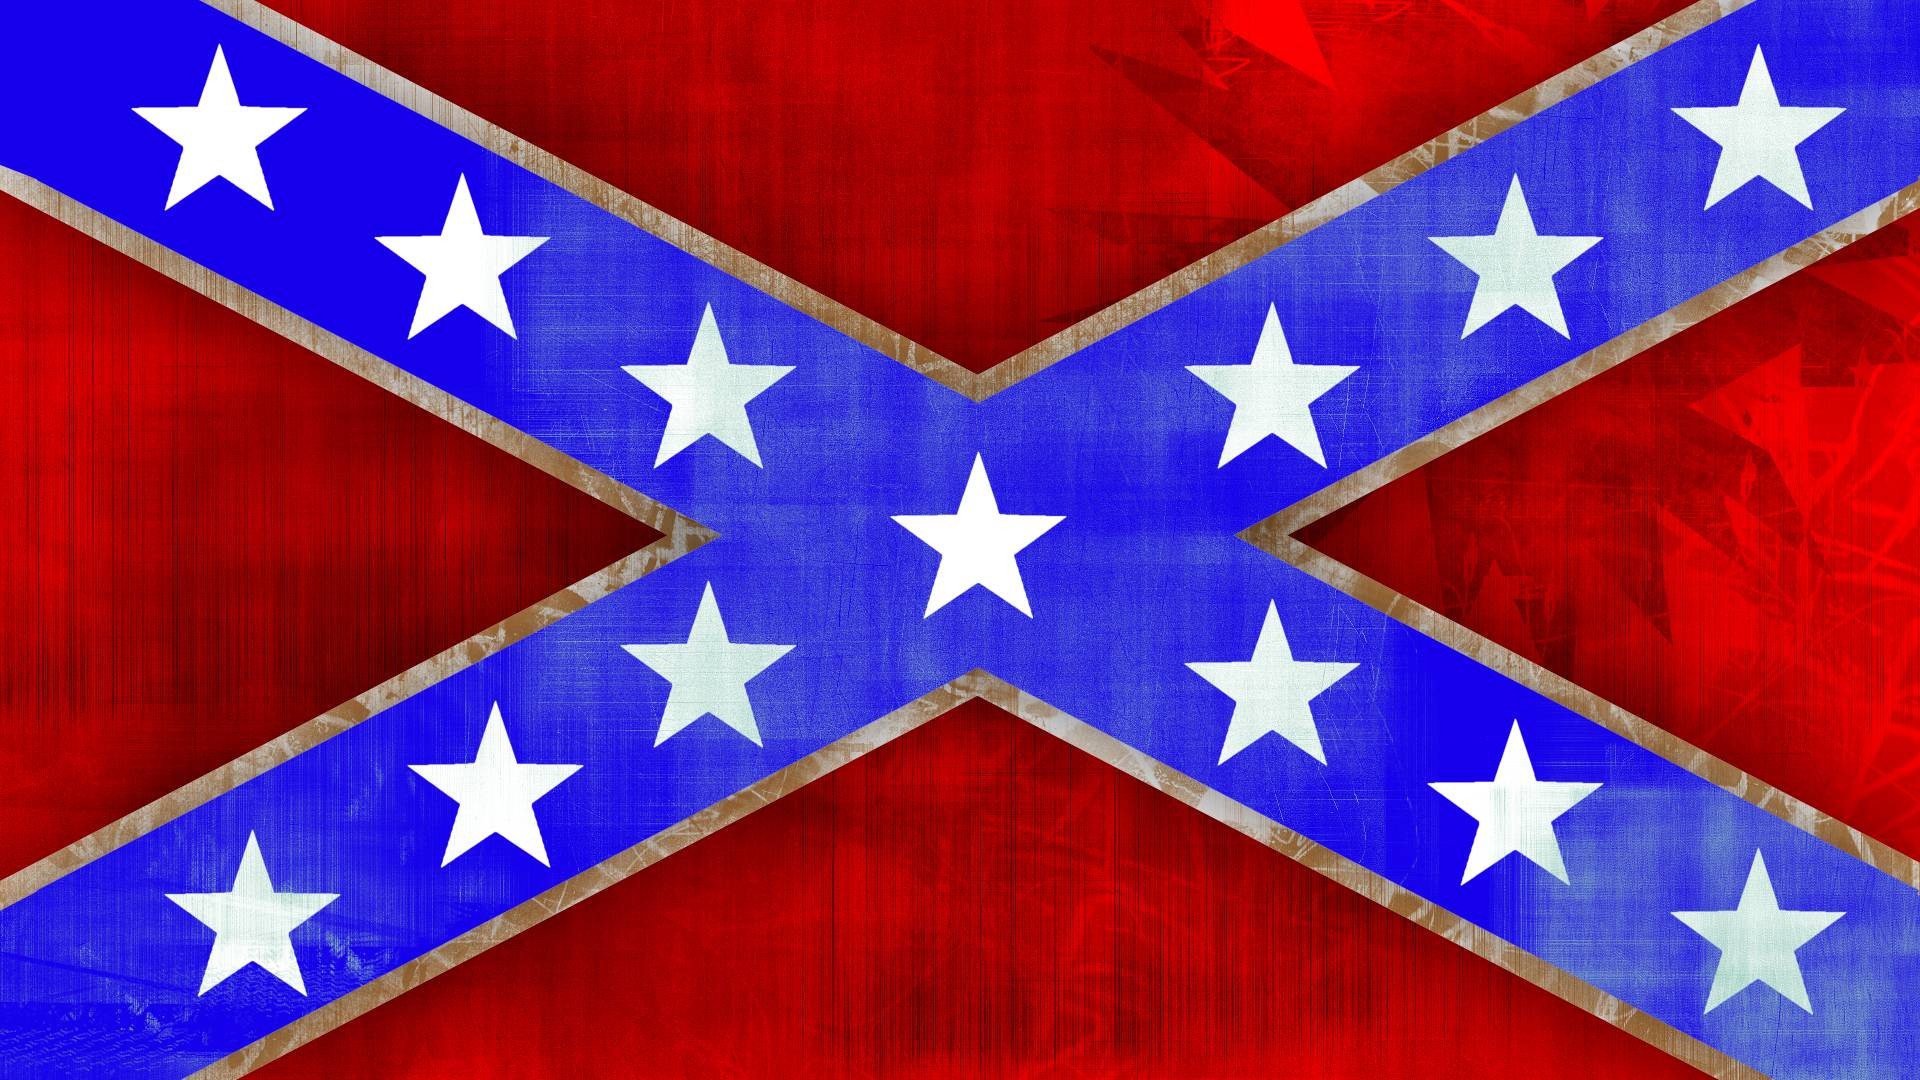 Confederate Flag wallpaper ·① Download free awesome HD wallpapers for desktop and mobile devices